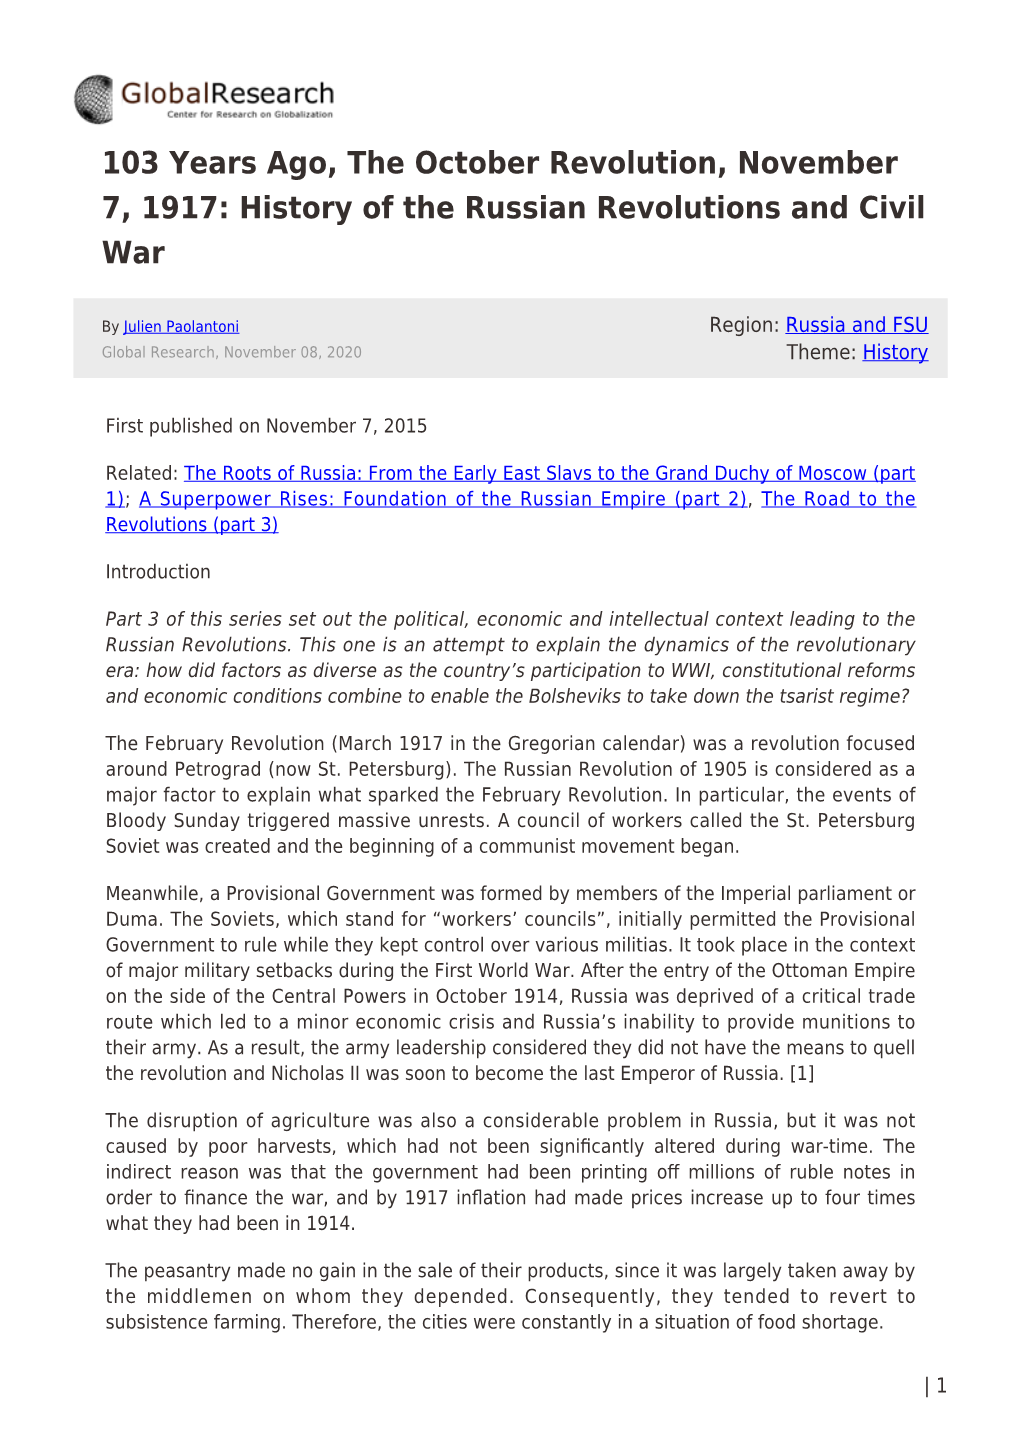 History of the Russian Revolutions and Civil War